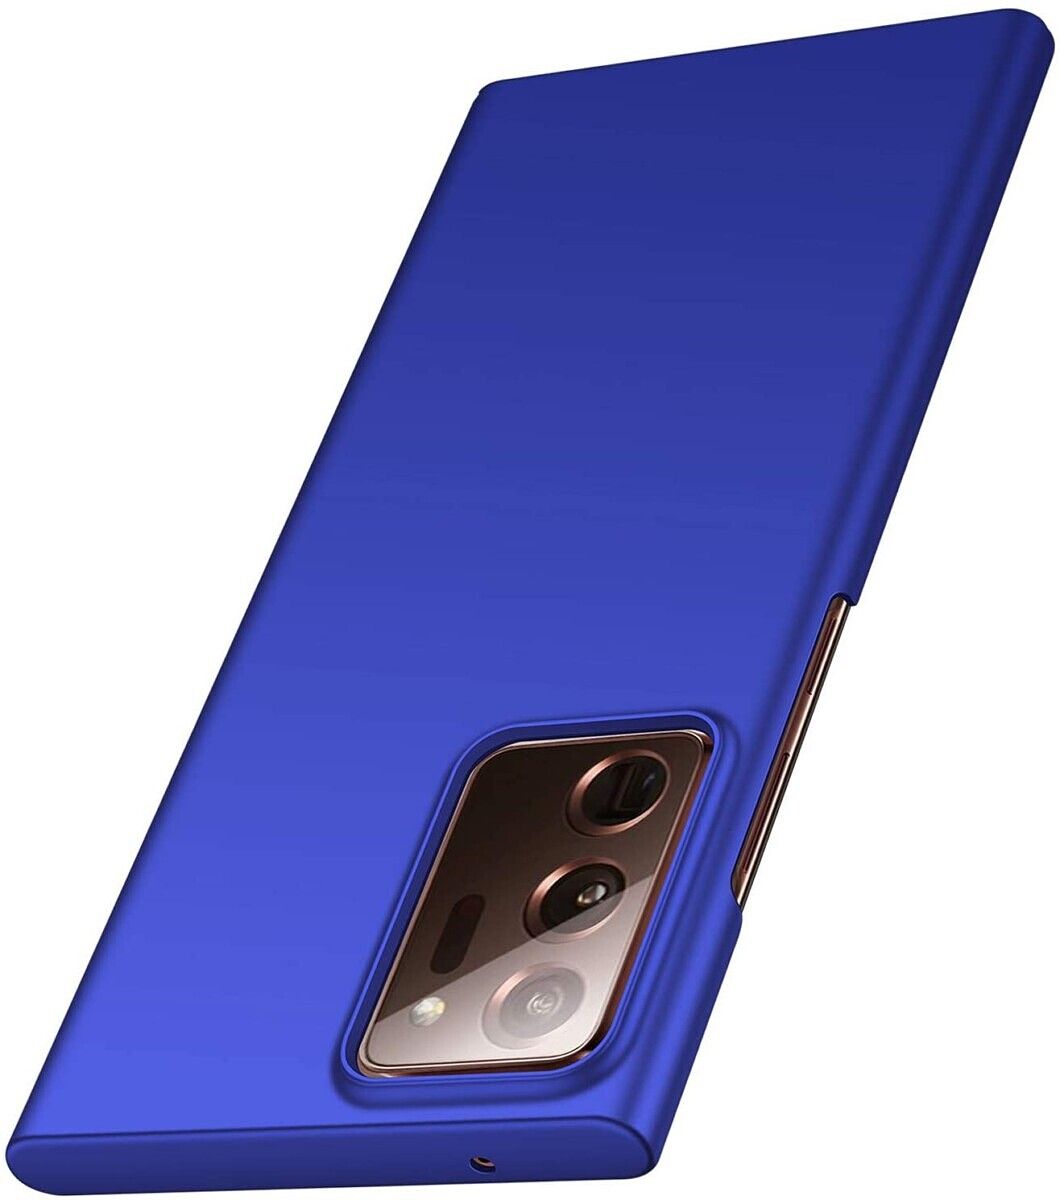 If all you want is a super-slim case, look no further. This won't provide you with a lot of protection against drops, but your phone will still remain sleek. It's also available in gorgeous Red and Blue colors.